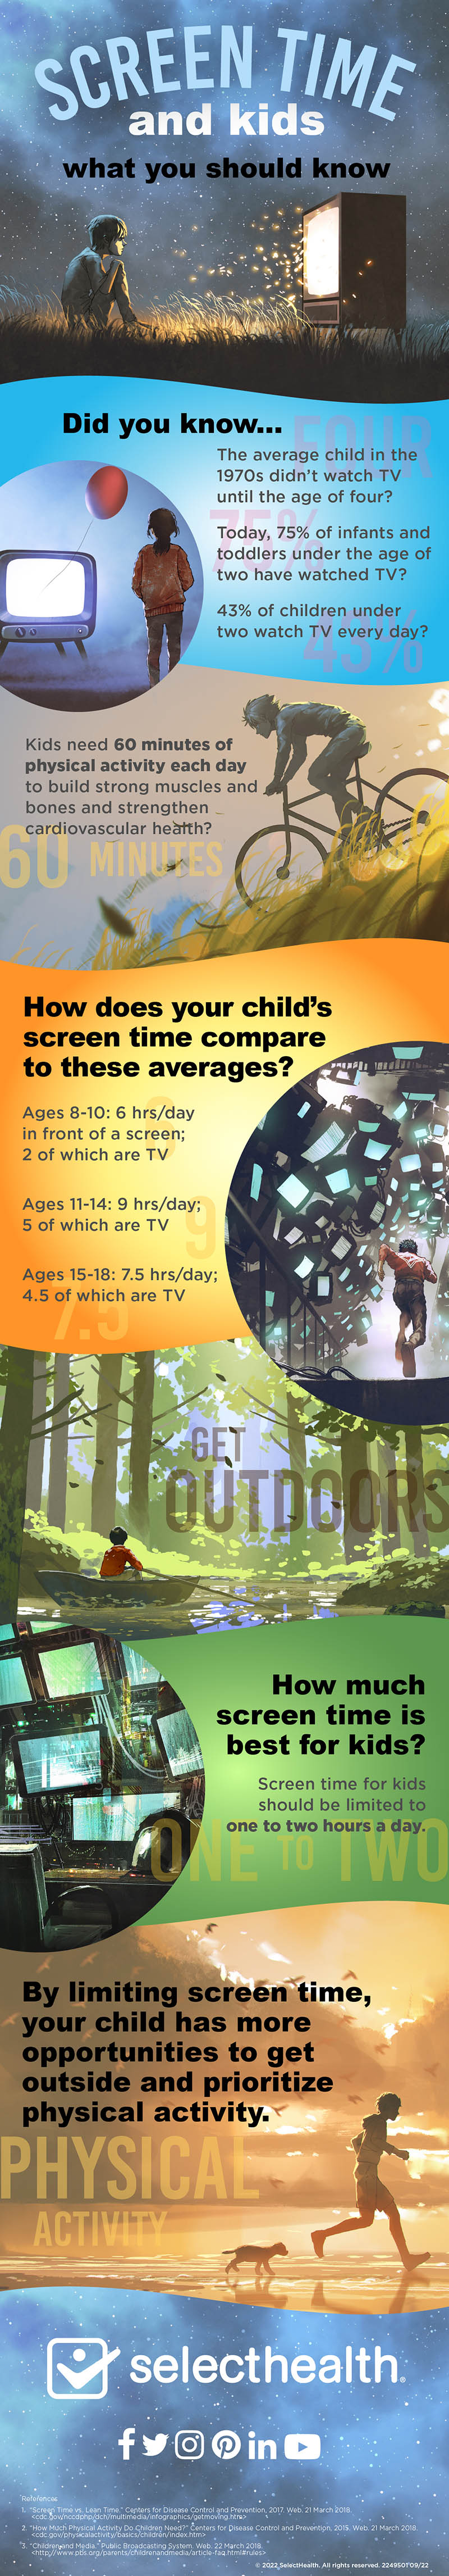 Screen Time and Kids: What You Should Know Infographic